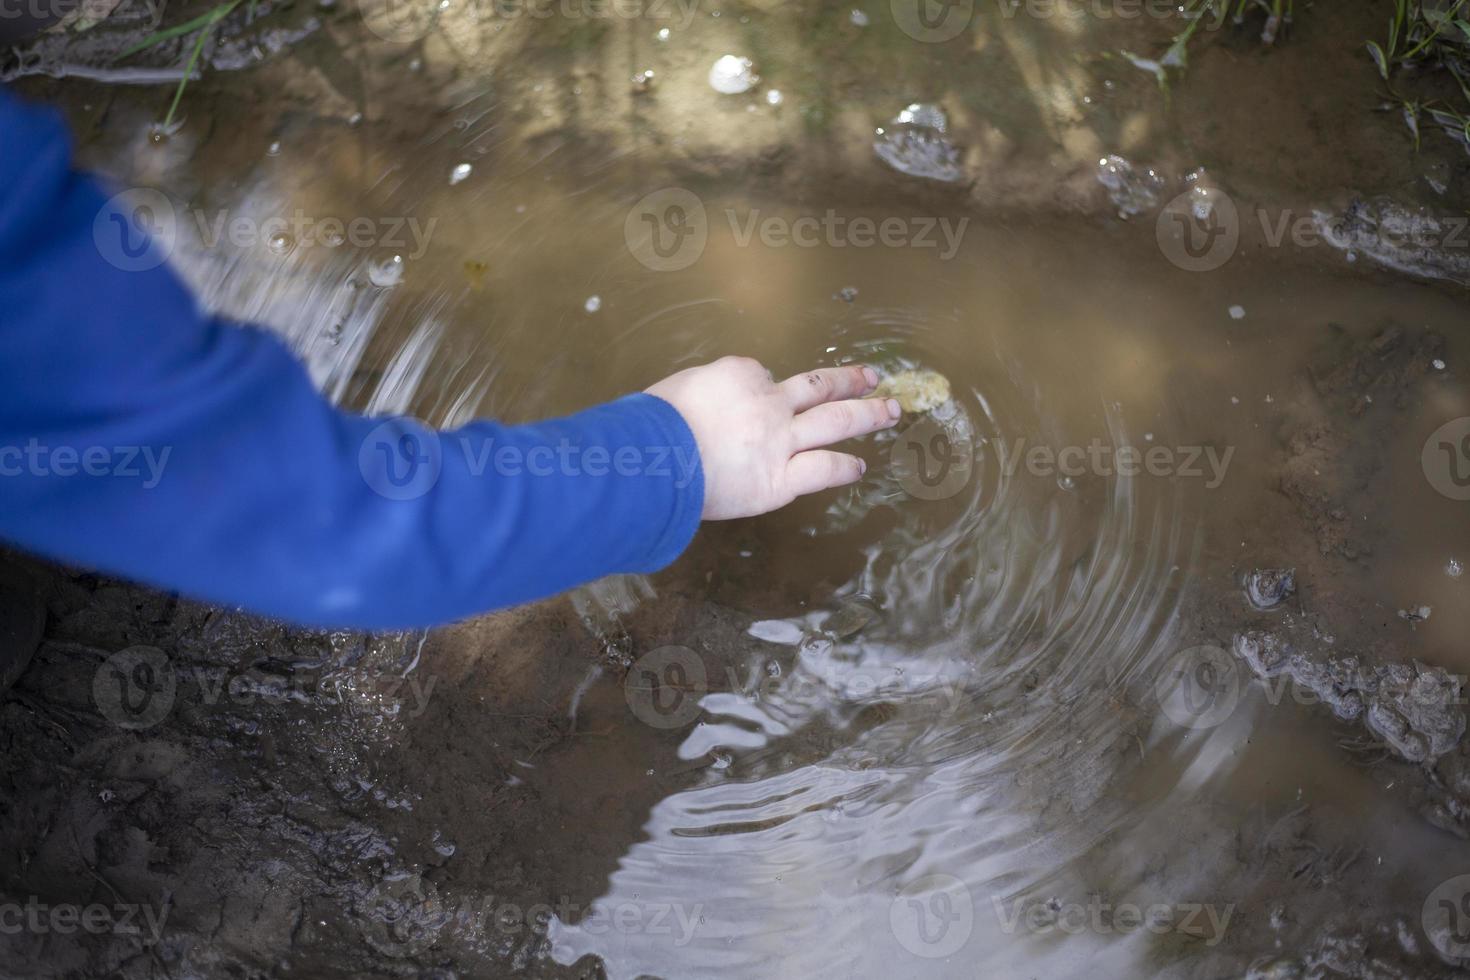 Child pulls dirt out of puddle. Child touches water. Boy searches for object in muddy puddle. photo